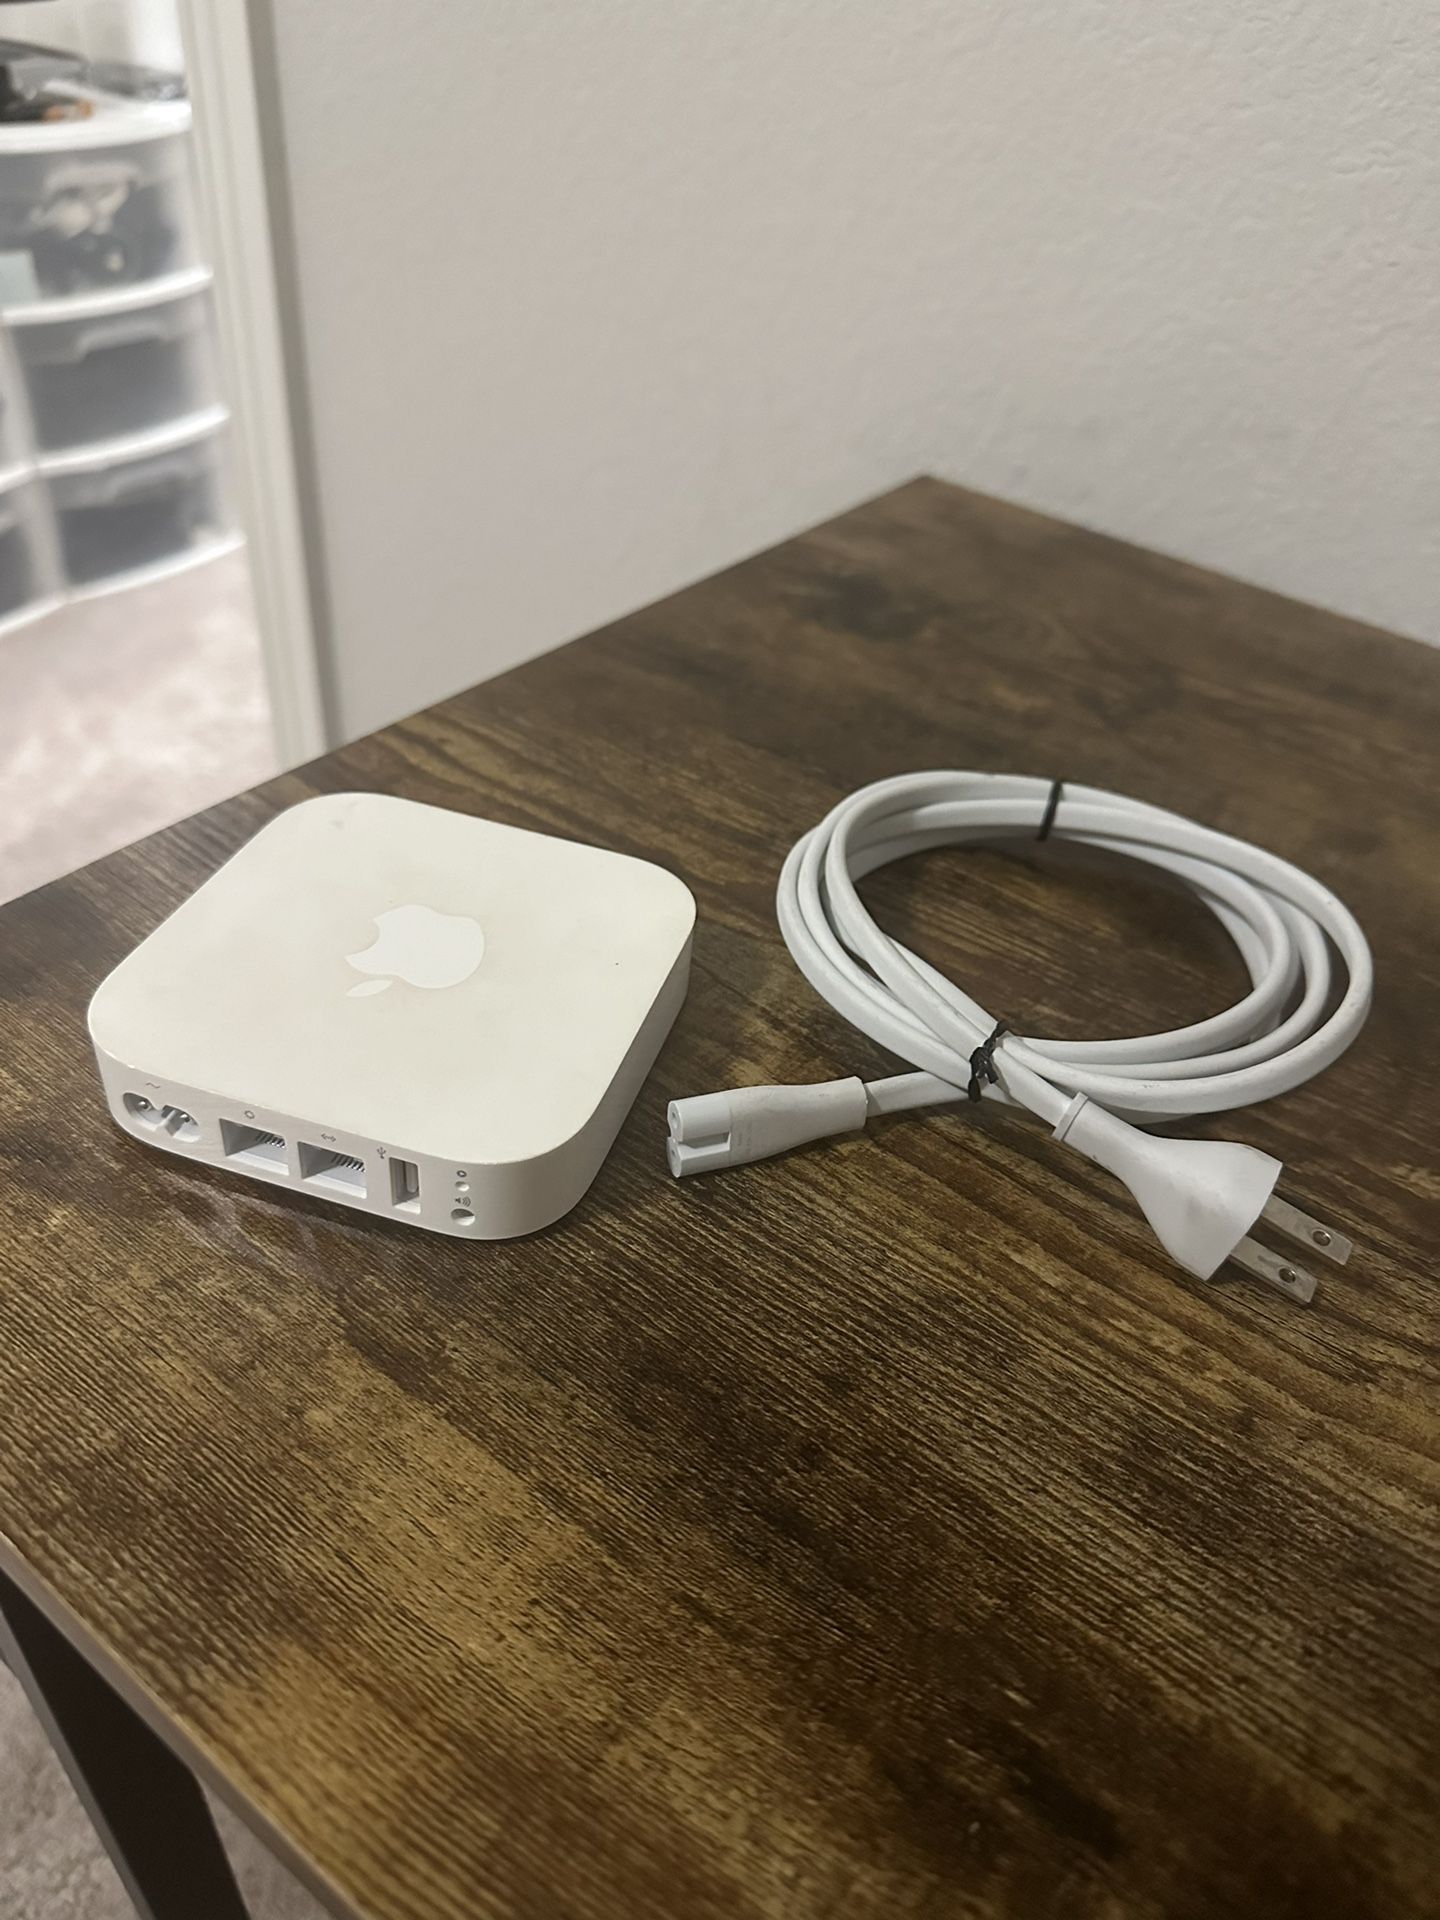 Apple A1392 Router AirPort Express 